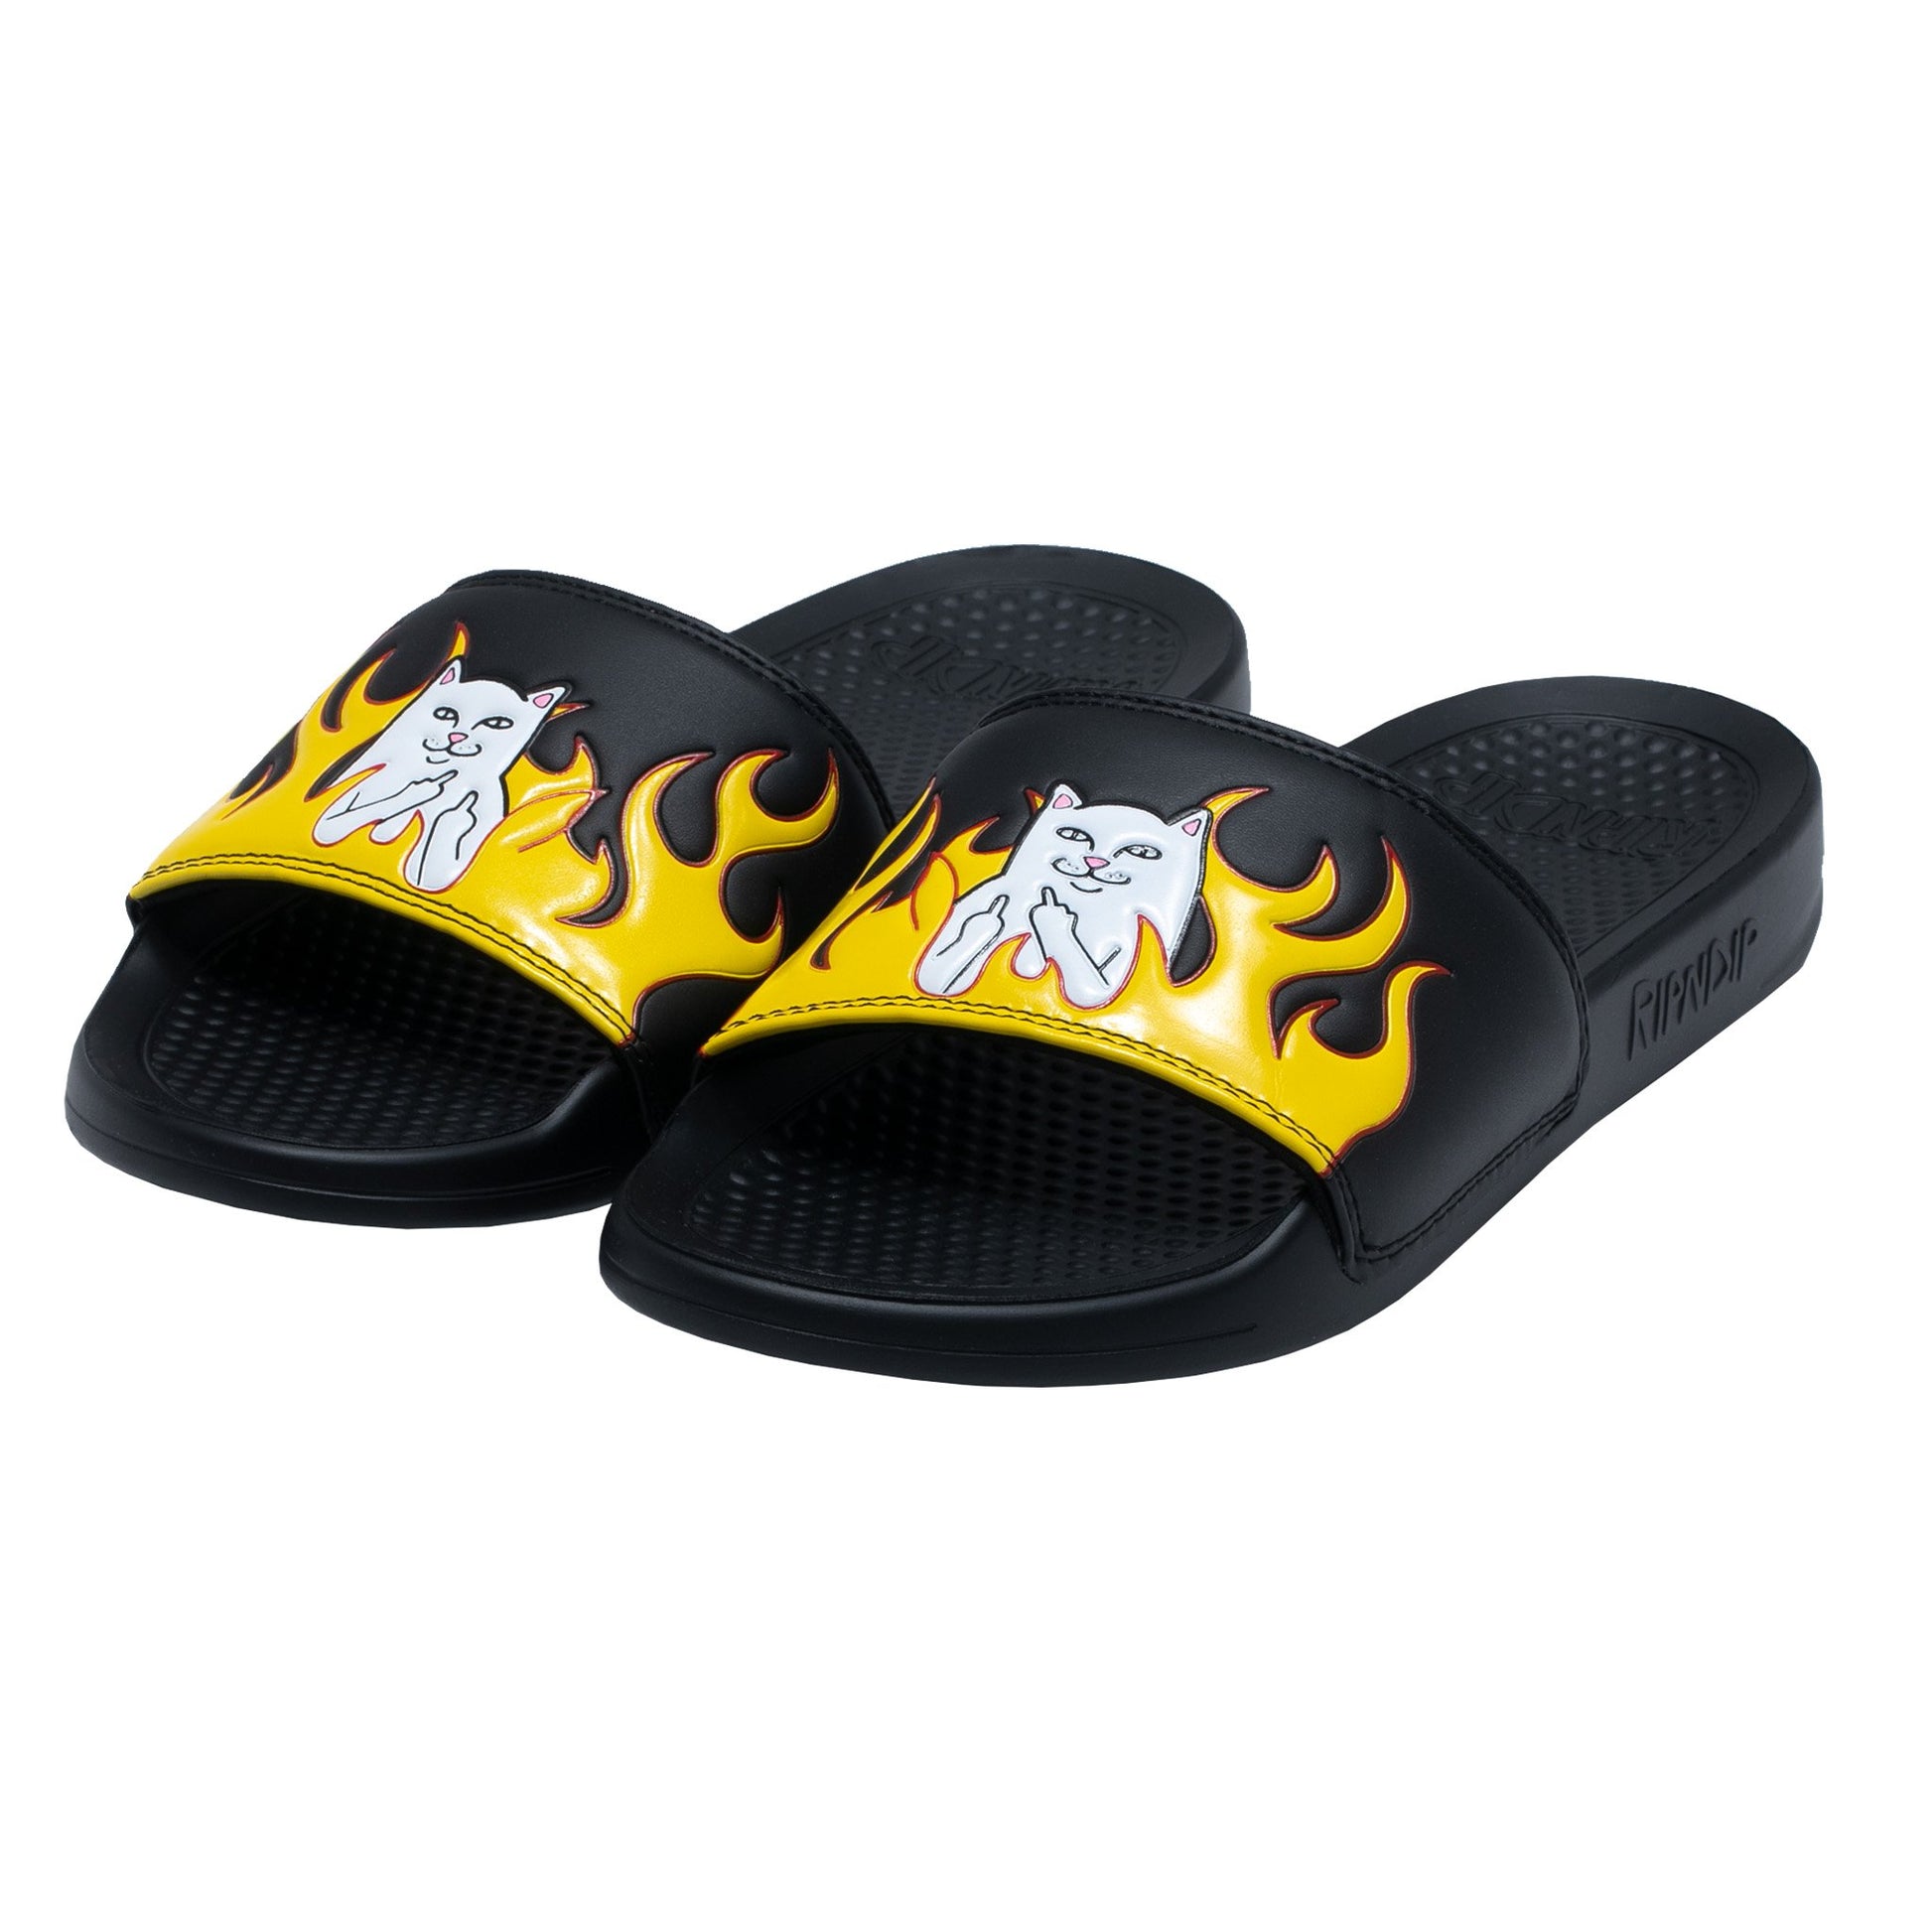 Ripndip Welcome To Heck Slides